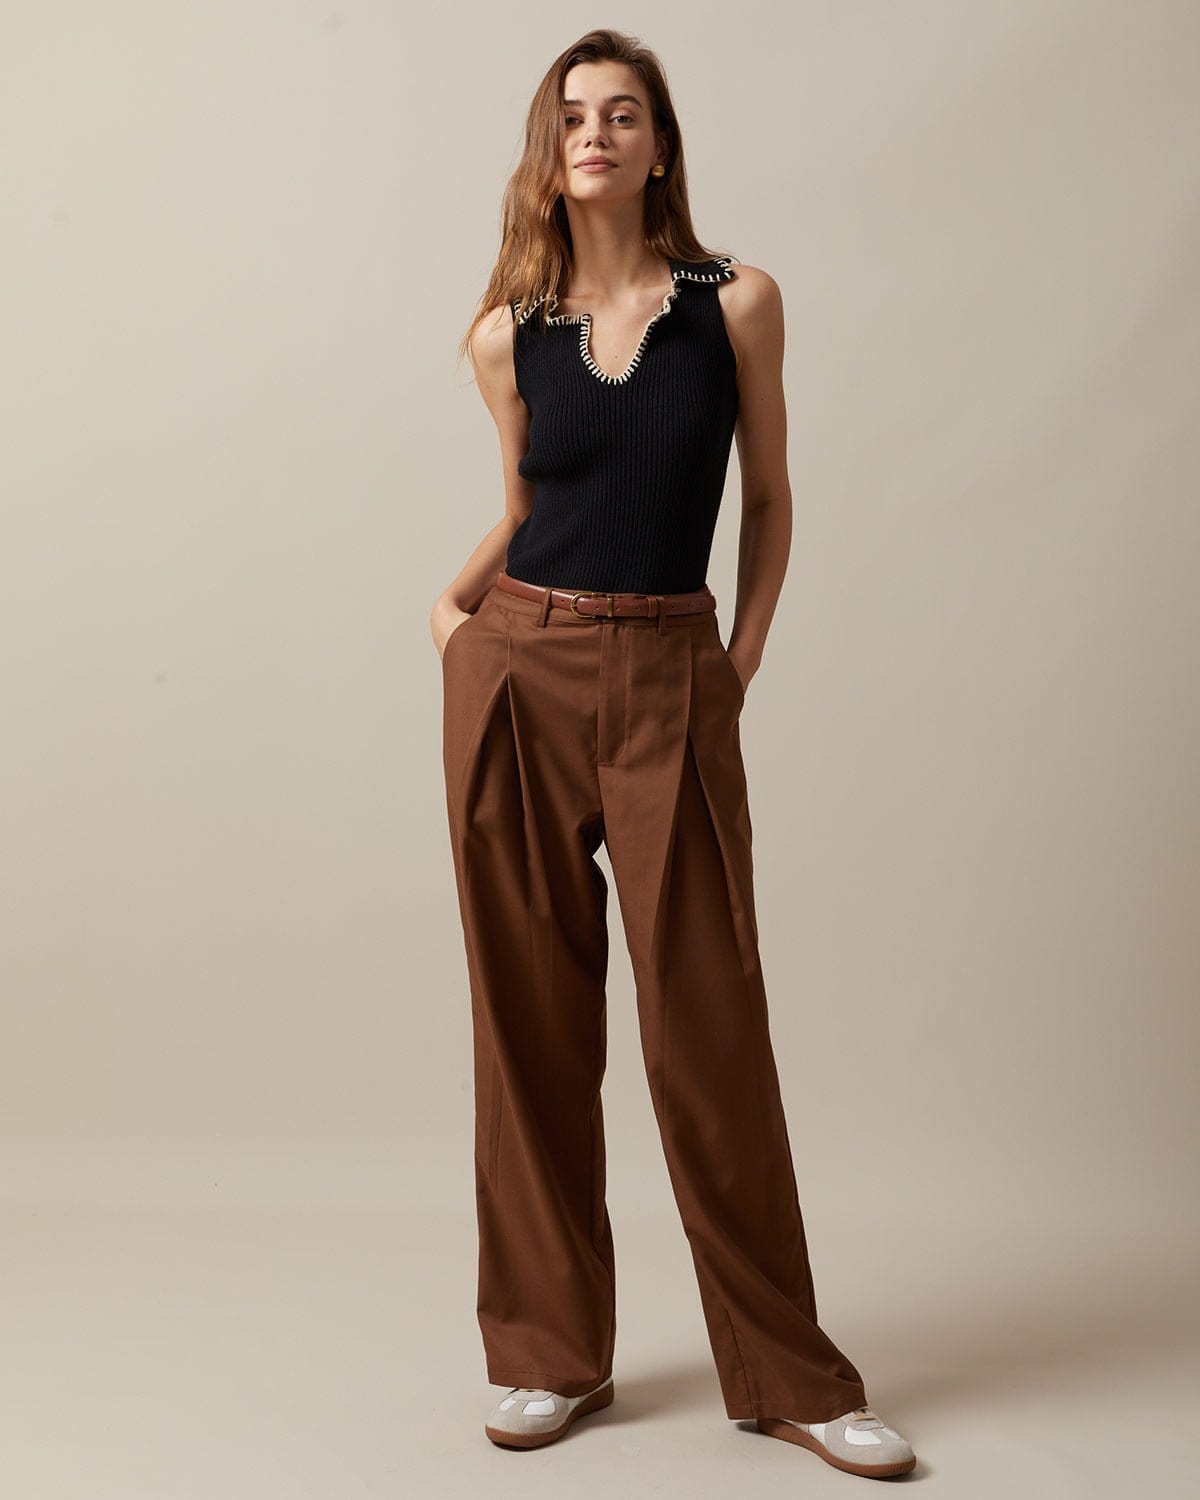 The Brown High Waisted Pleated Straight Pants